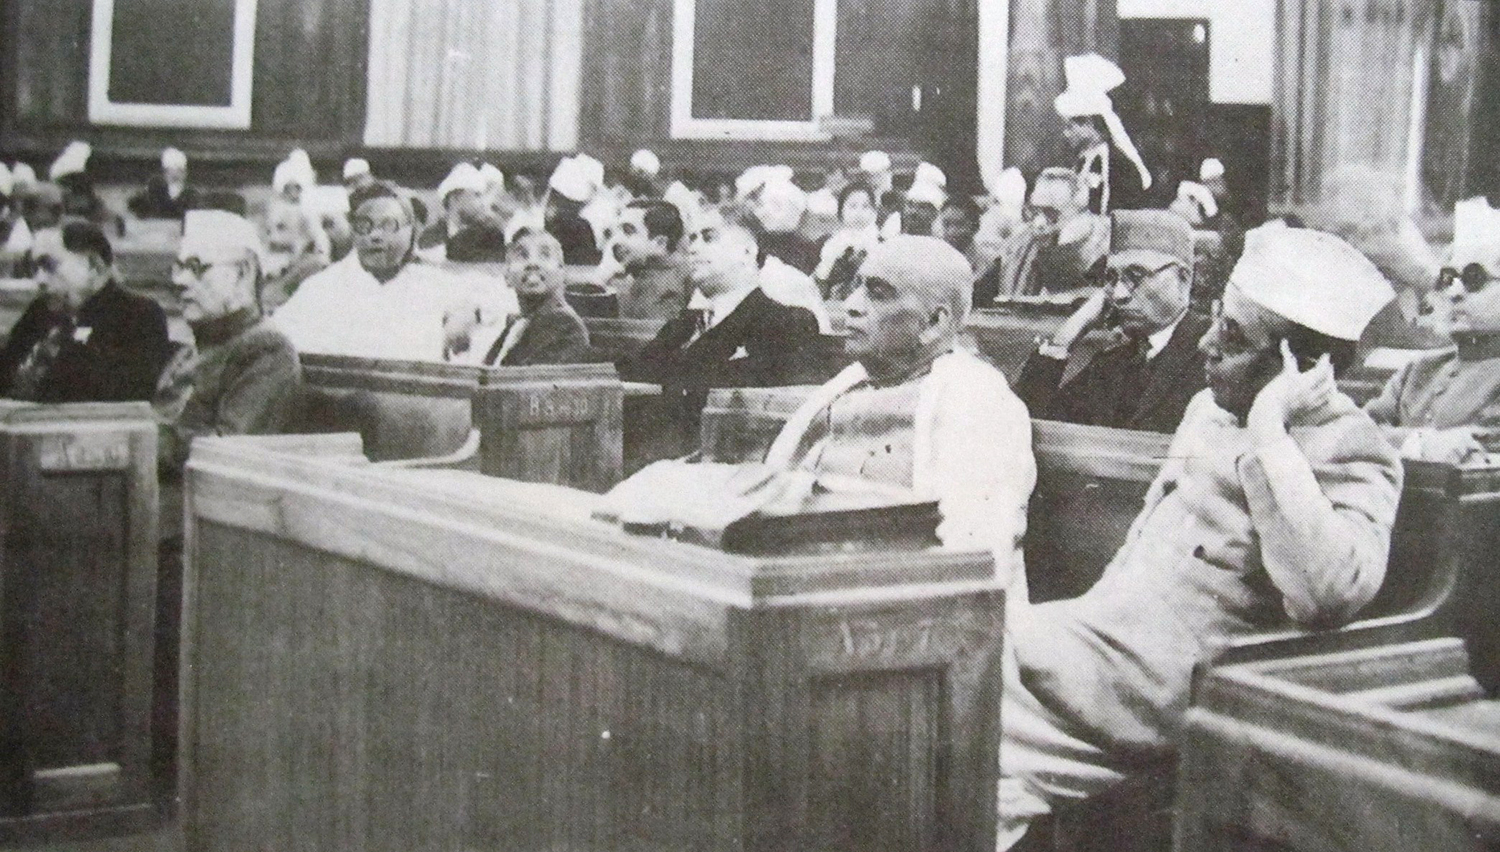 From the constituent assembly to the Indra Sawhney case, tracing the debate on economic reservations